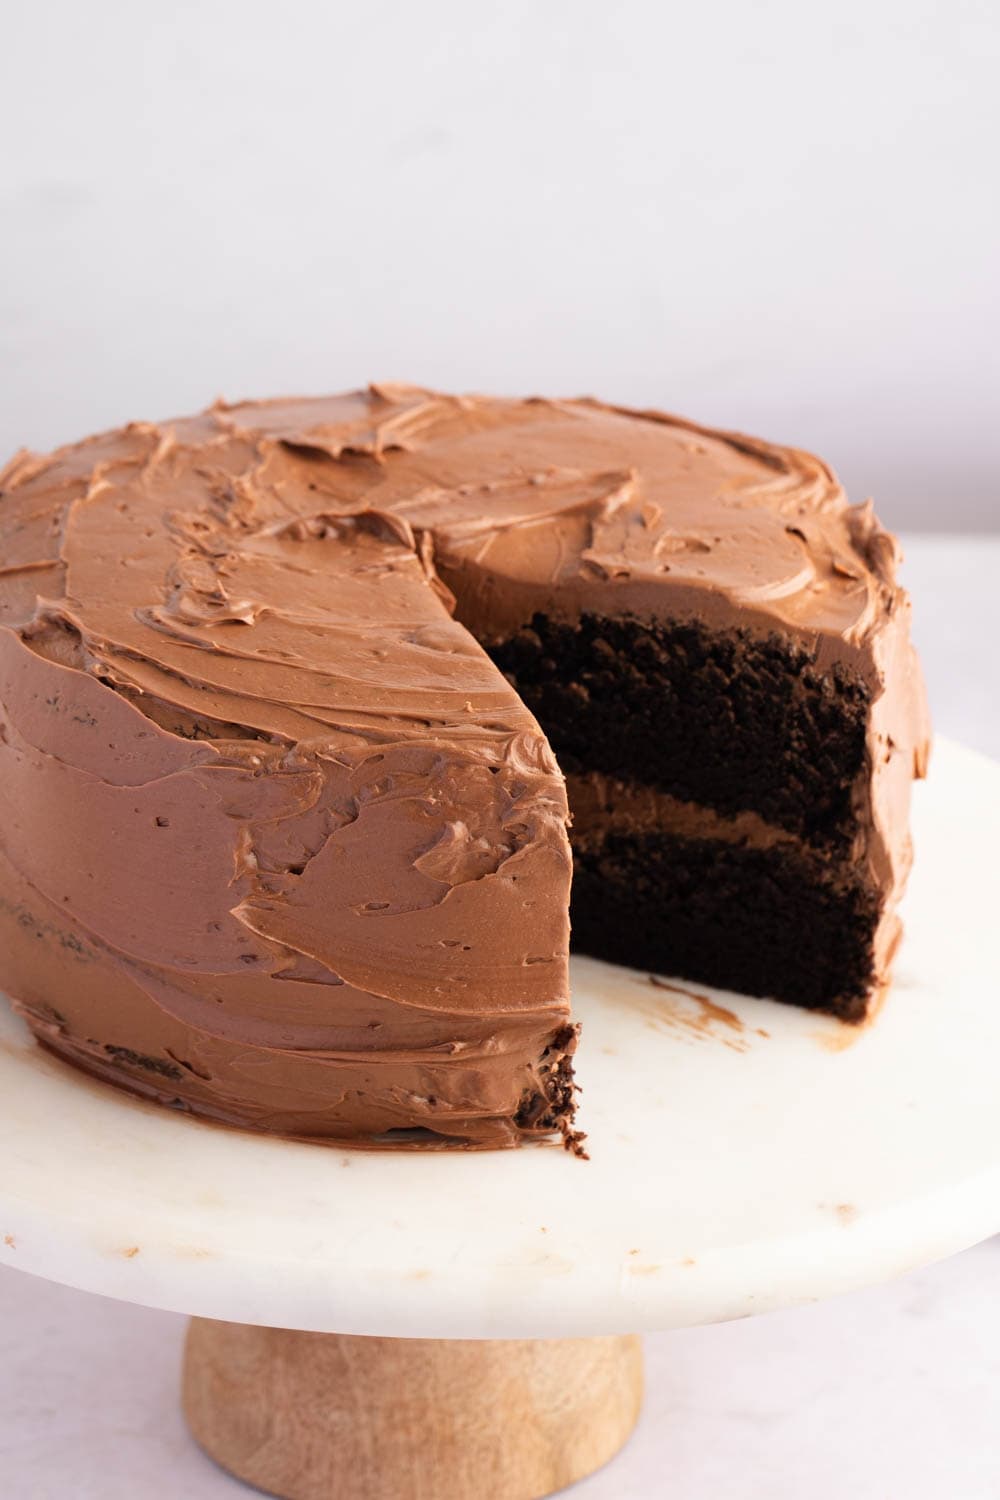 Moist, Rich and Chocolatey Whole Chocolate Cake, With a Slice Take Out, Served on a Cake Tray 